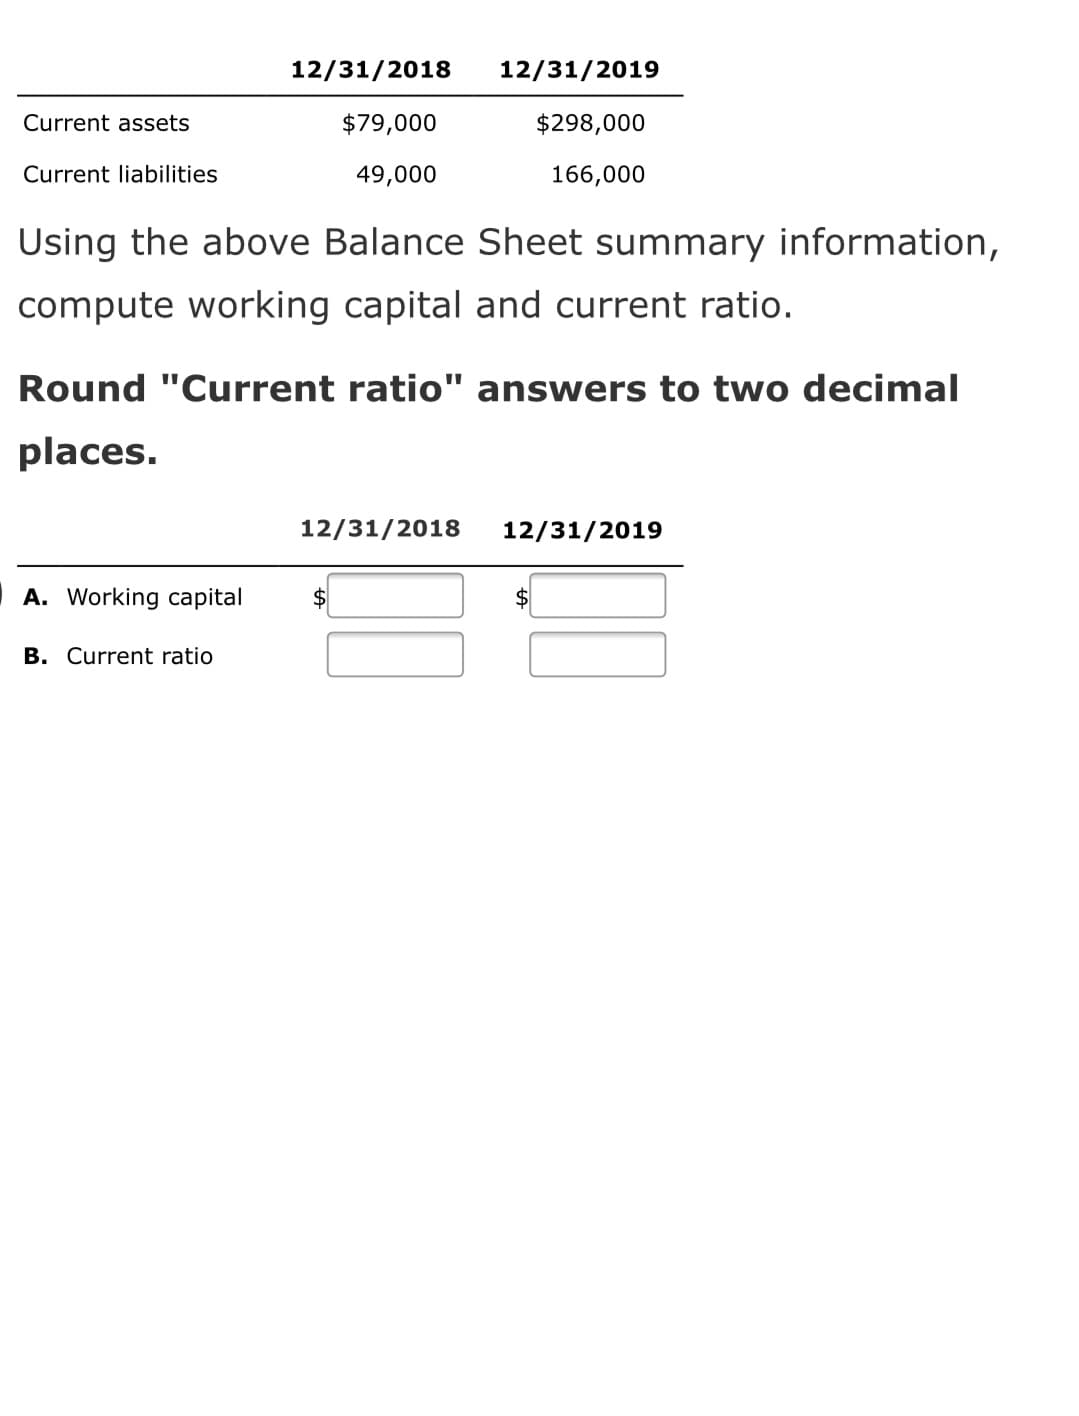 12/31/2018
12/31/2019
Current assets
$79,000
$298,000
Current liabilities
49,000
166,000
Using the above Balance Sheet summary information,
compute working capital and current ratio.
Round "Current ratio" answers to two decimal
places.
12/31/2018
12/31/2019
A. Working capital
$4
B. Current ratio
